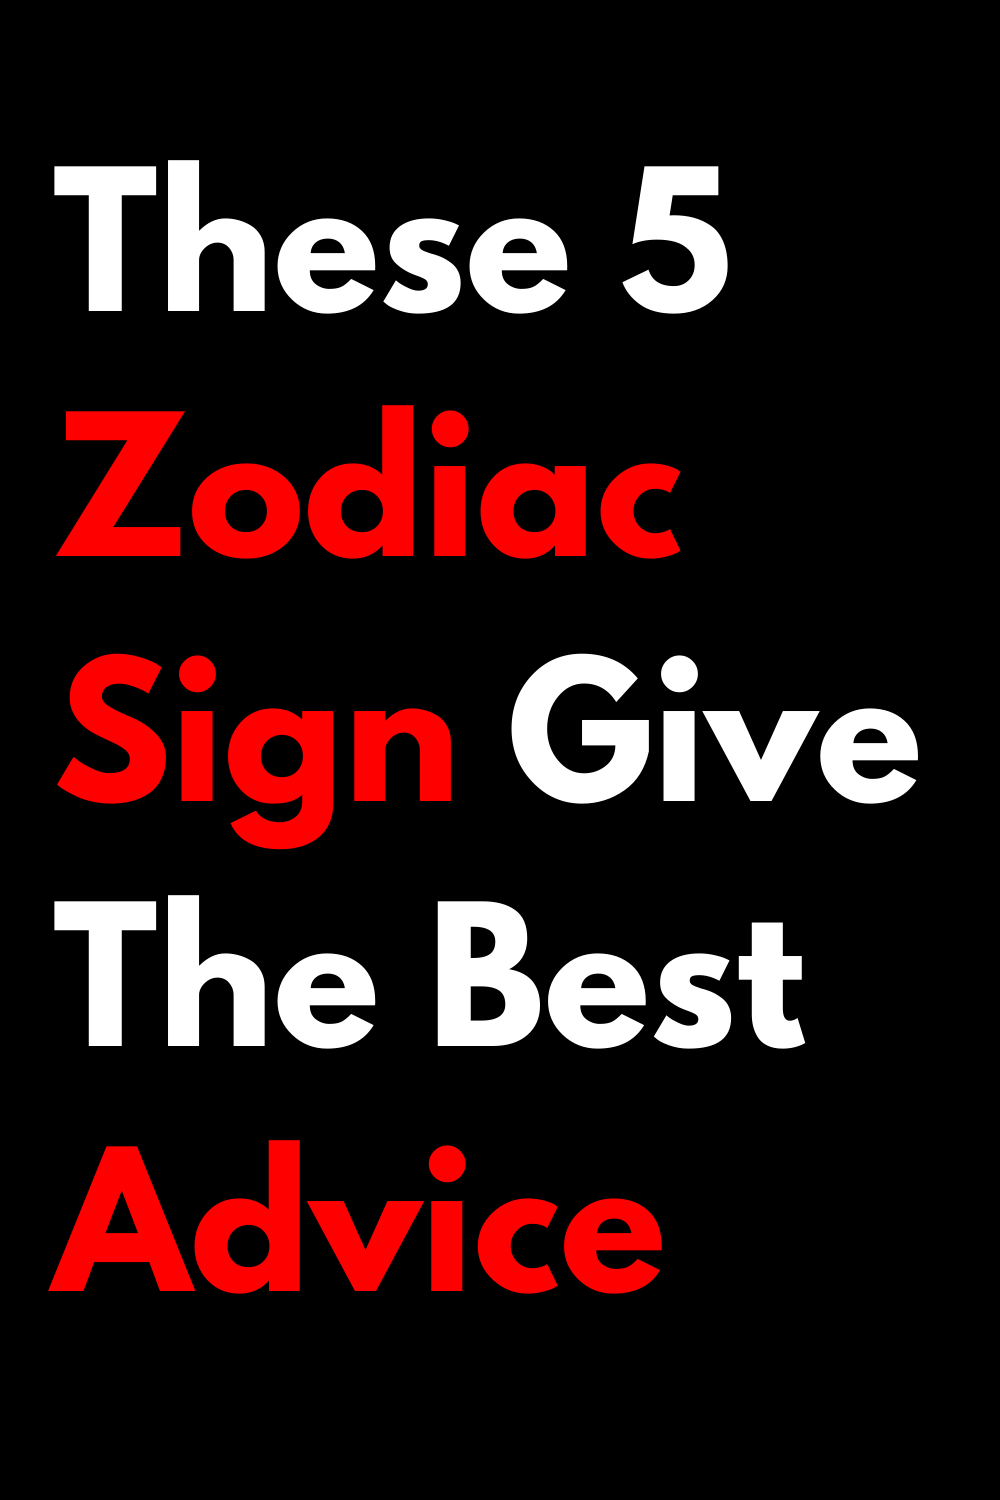 These 5 Zodiac Sign Give The Best Advice